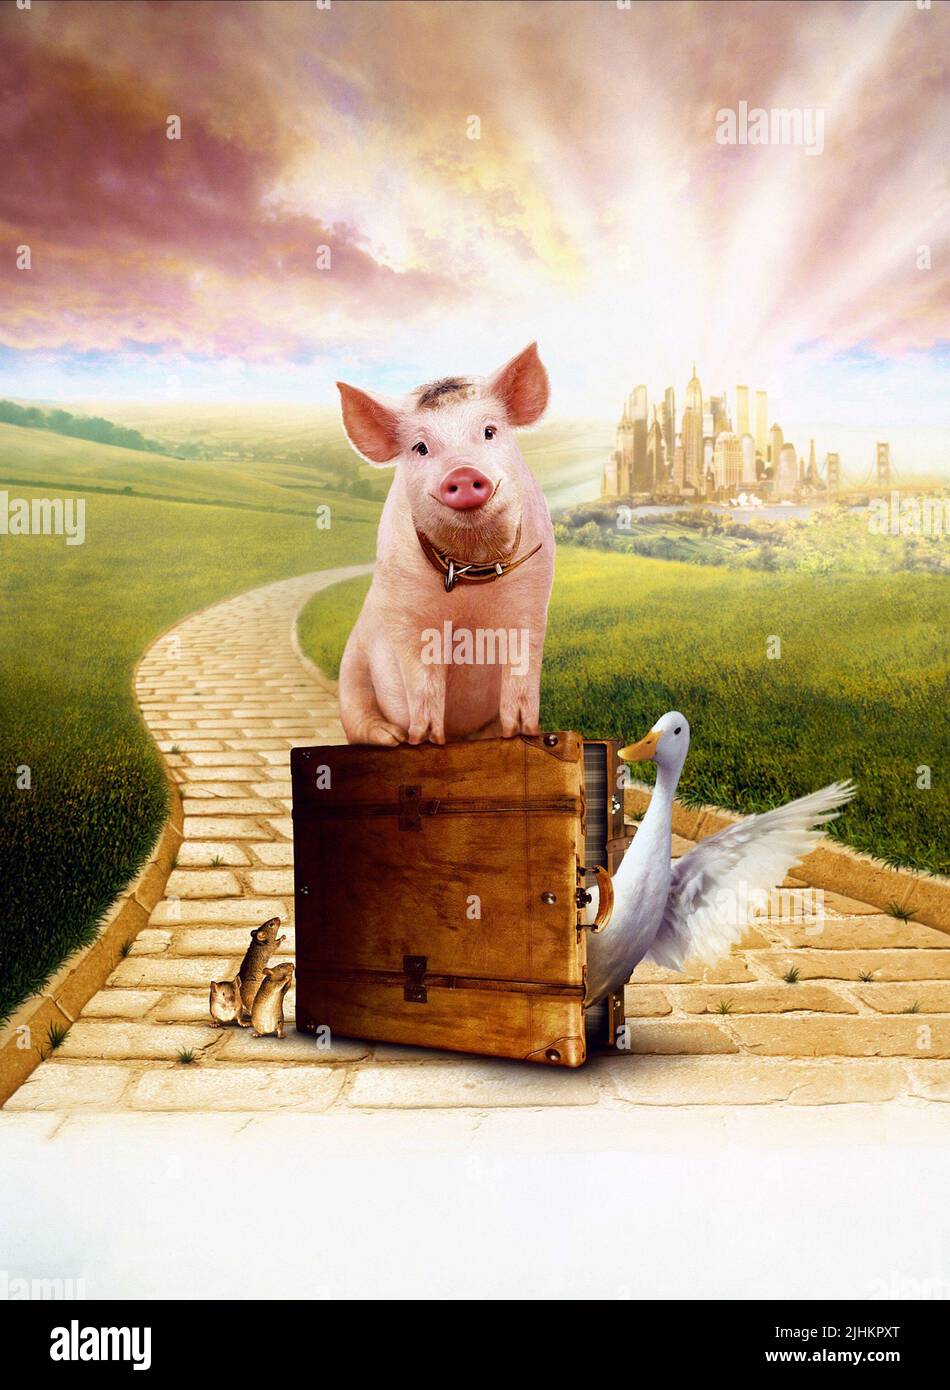 BABE, FERDINAND, BABE: PIG IN THE CITY, 1998 Stock Photo